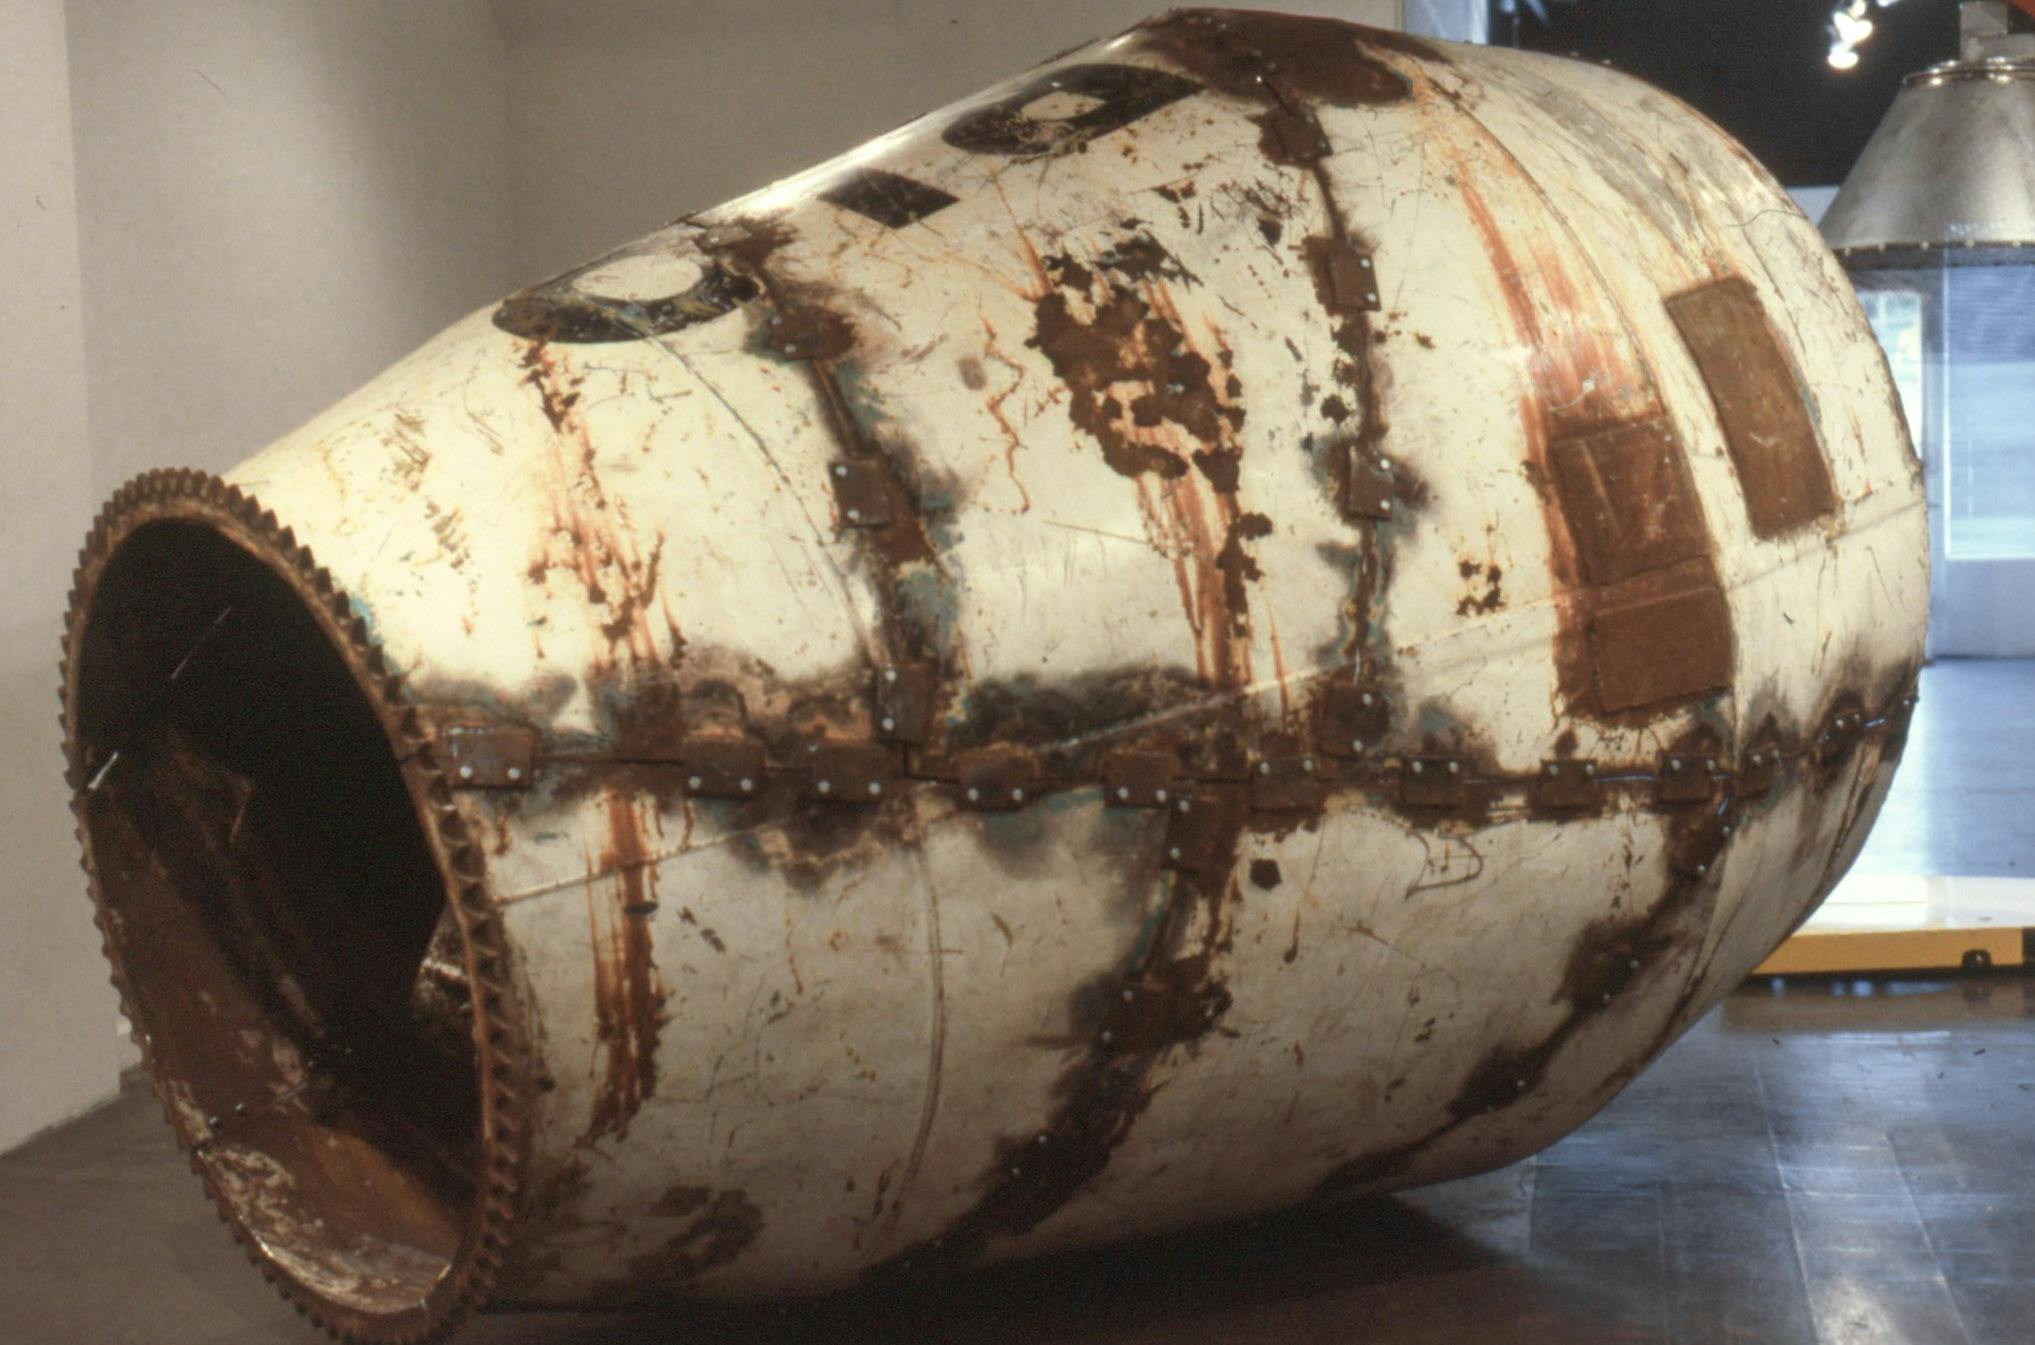 A sculpture made of a deteriorated cement mixer rests on the floor of a gallery. The exterior is white with rusty metal patches and bolts over the seams, and the interior is entirely rust coloured.